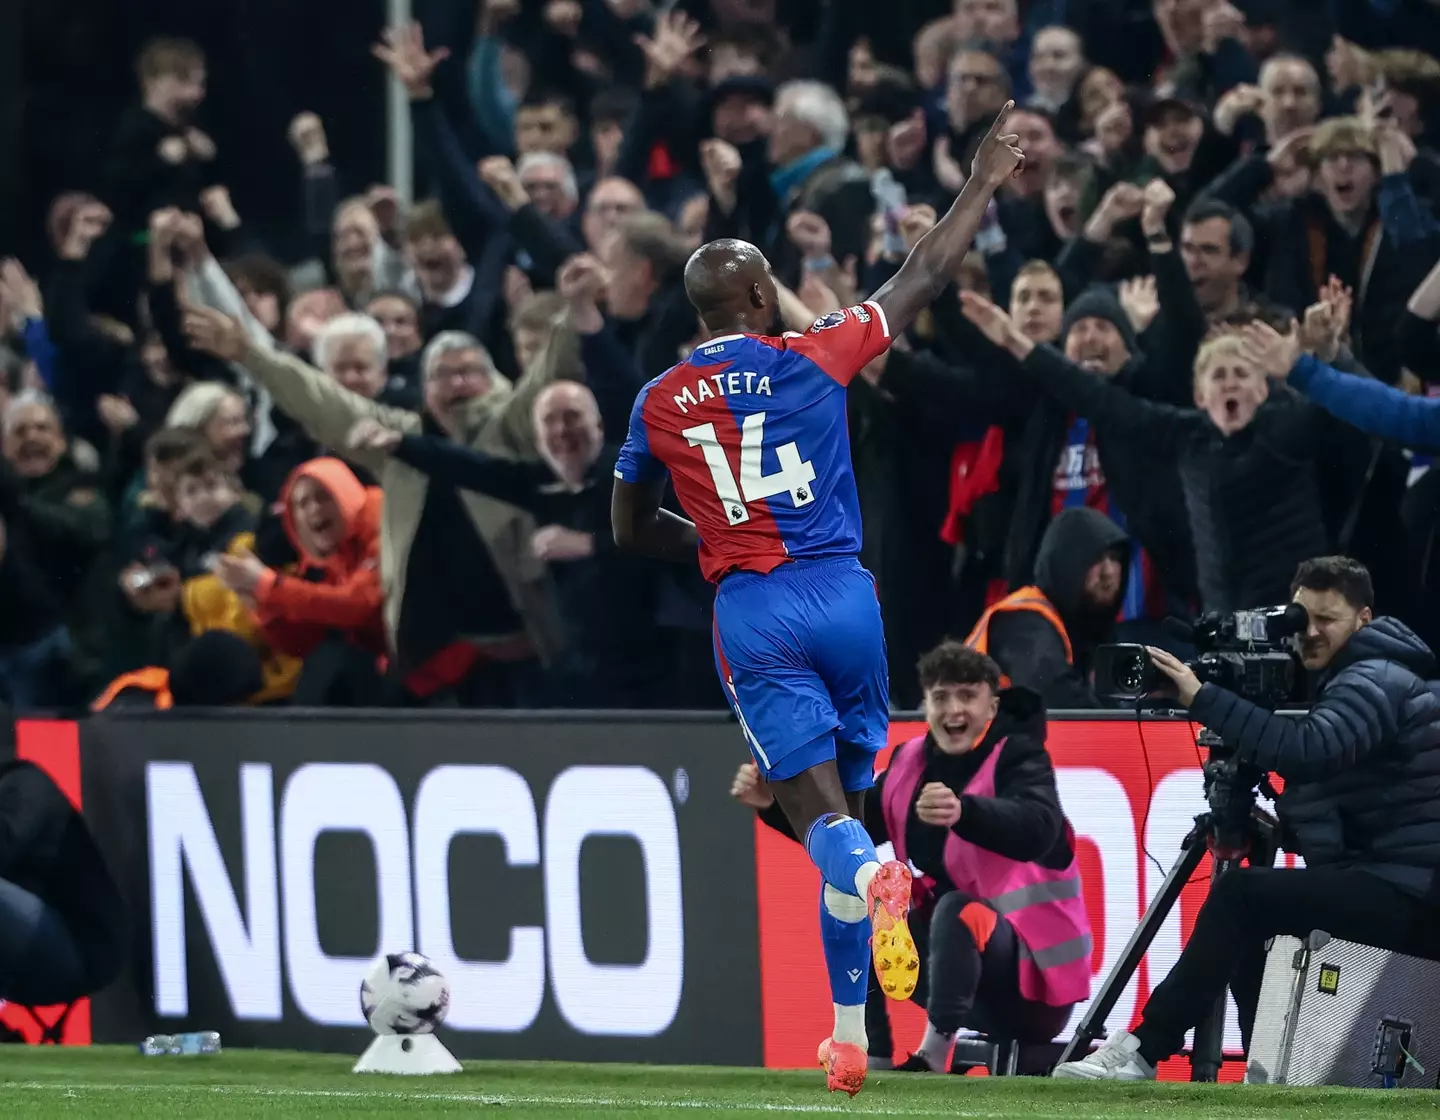 Jean-Philippe Mateta wheels away in celebration after scoring against Manchester United. Image: Getty